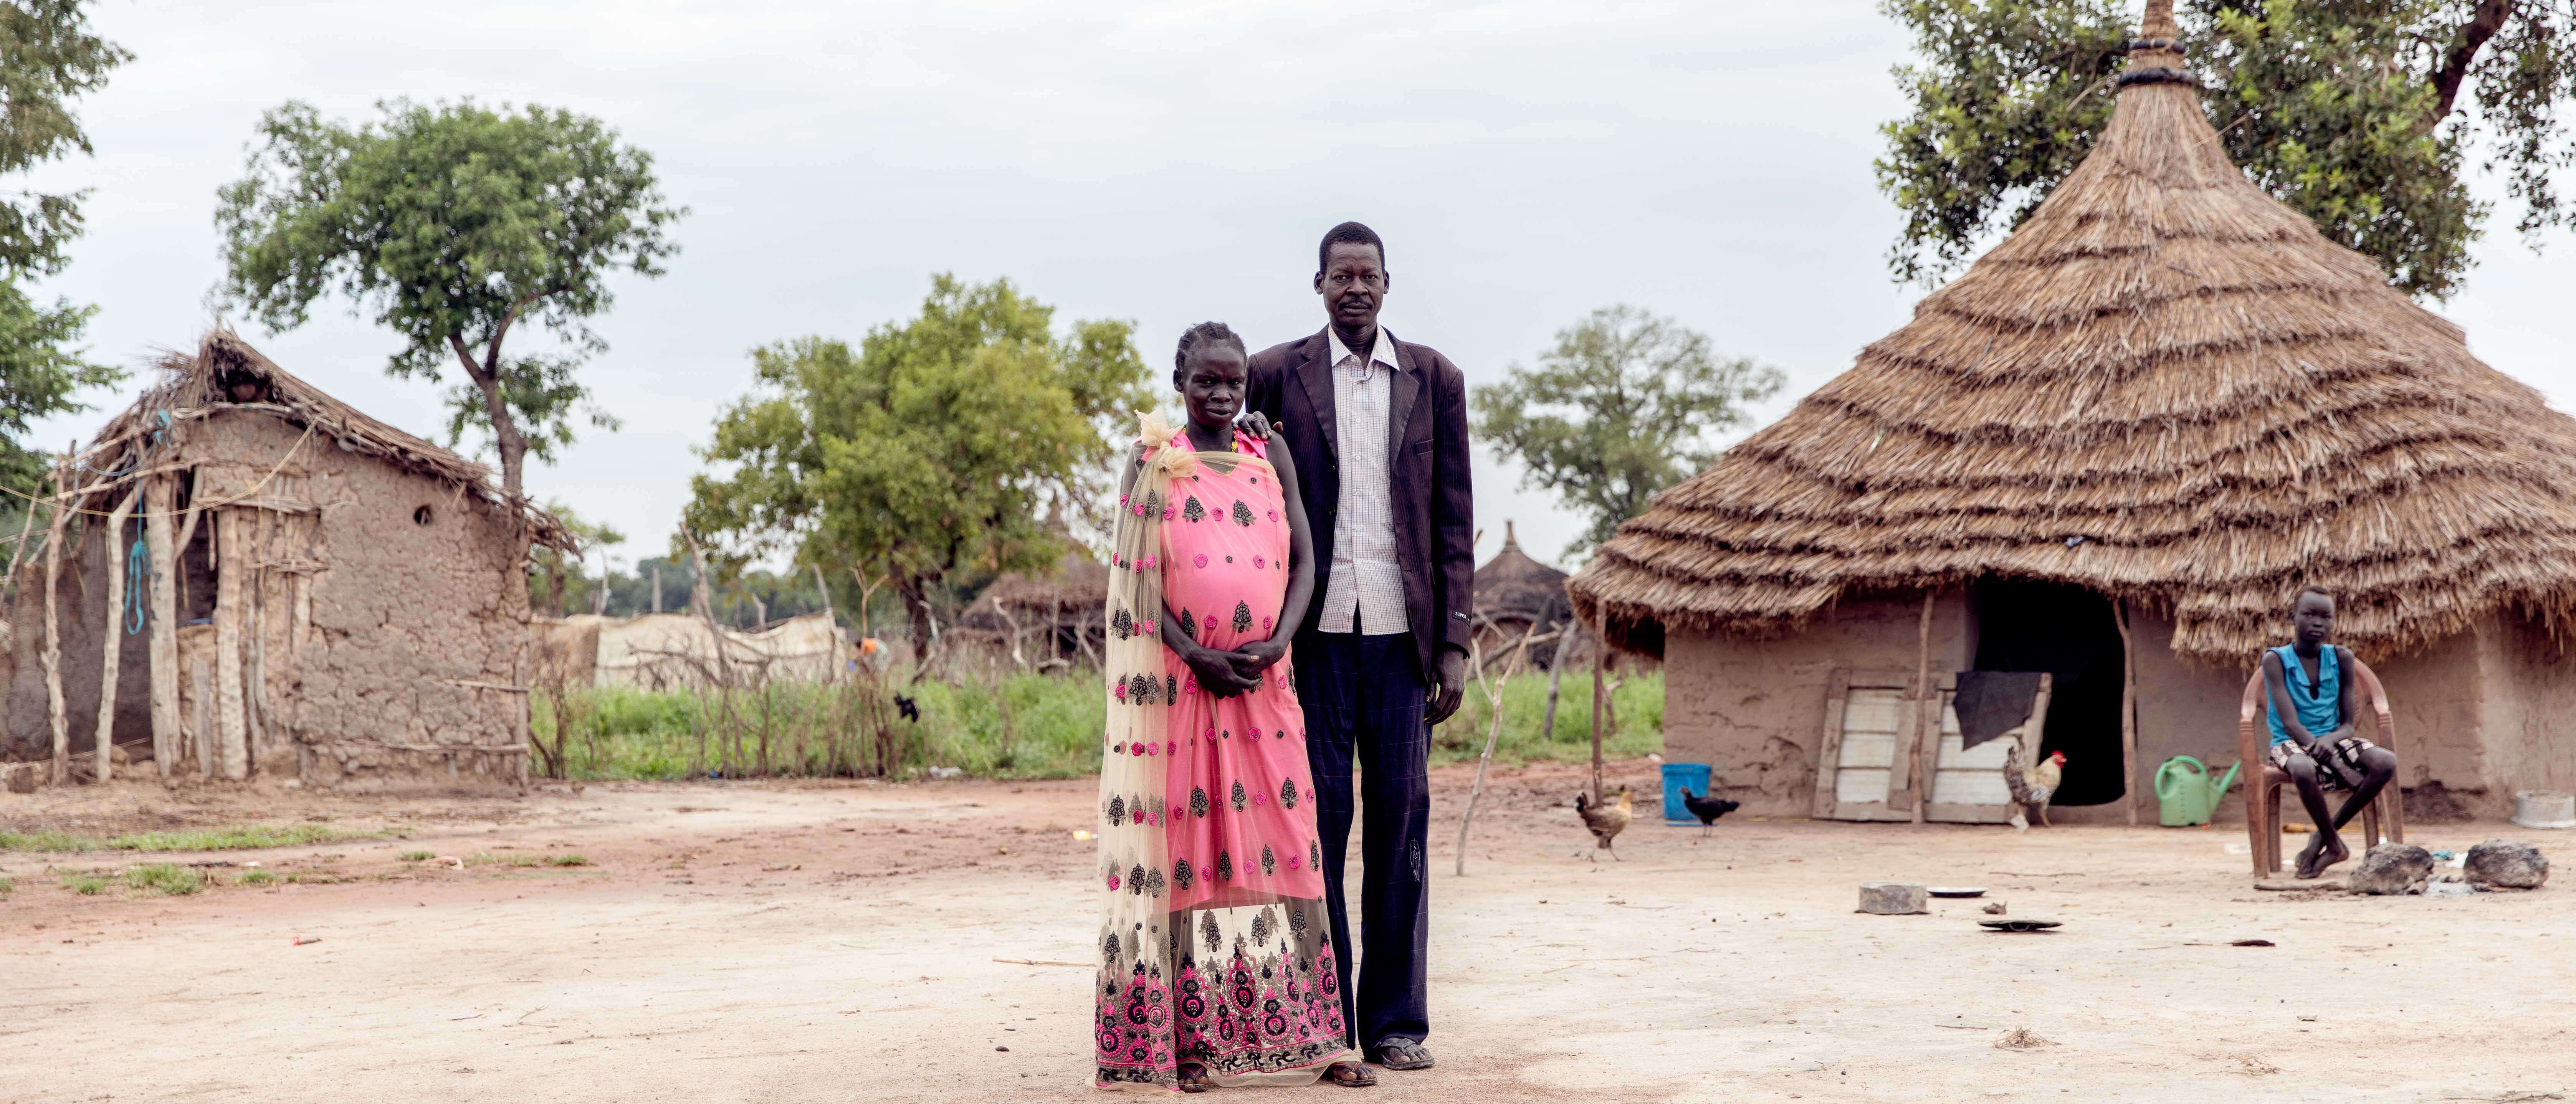 A man and woman embrace while posing for a photo outside their home in South Sudan.